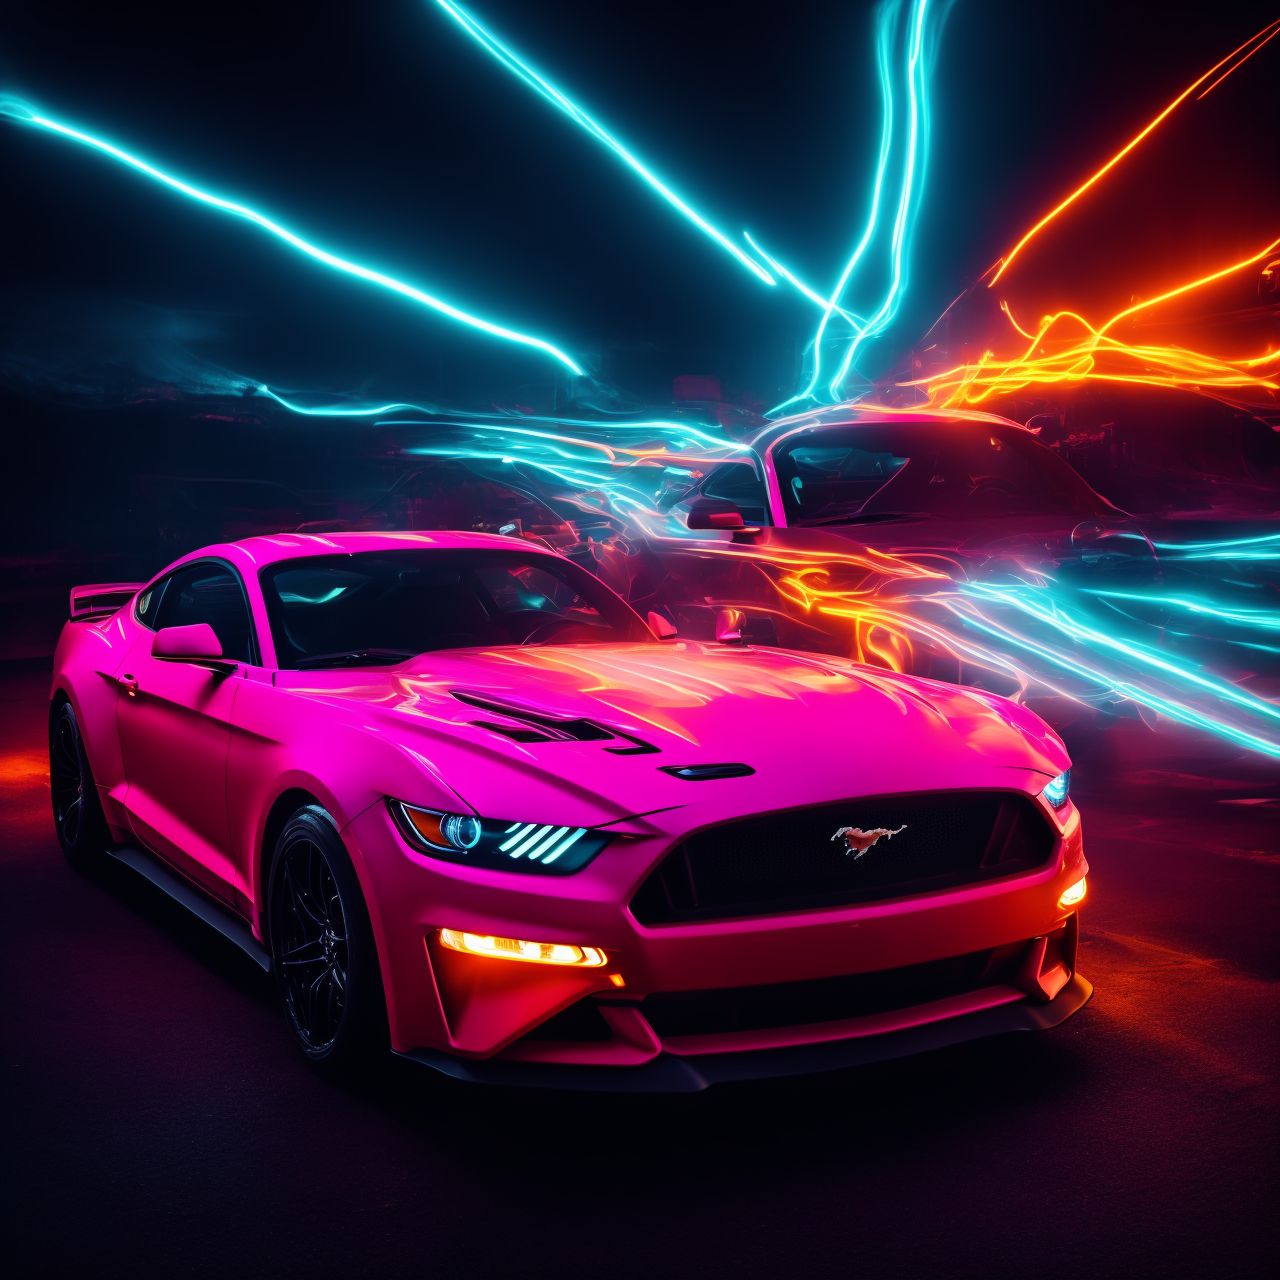 ford mustang, neon mesmerizing chaos, dynamic composition and dramatic lighting, Neon